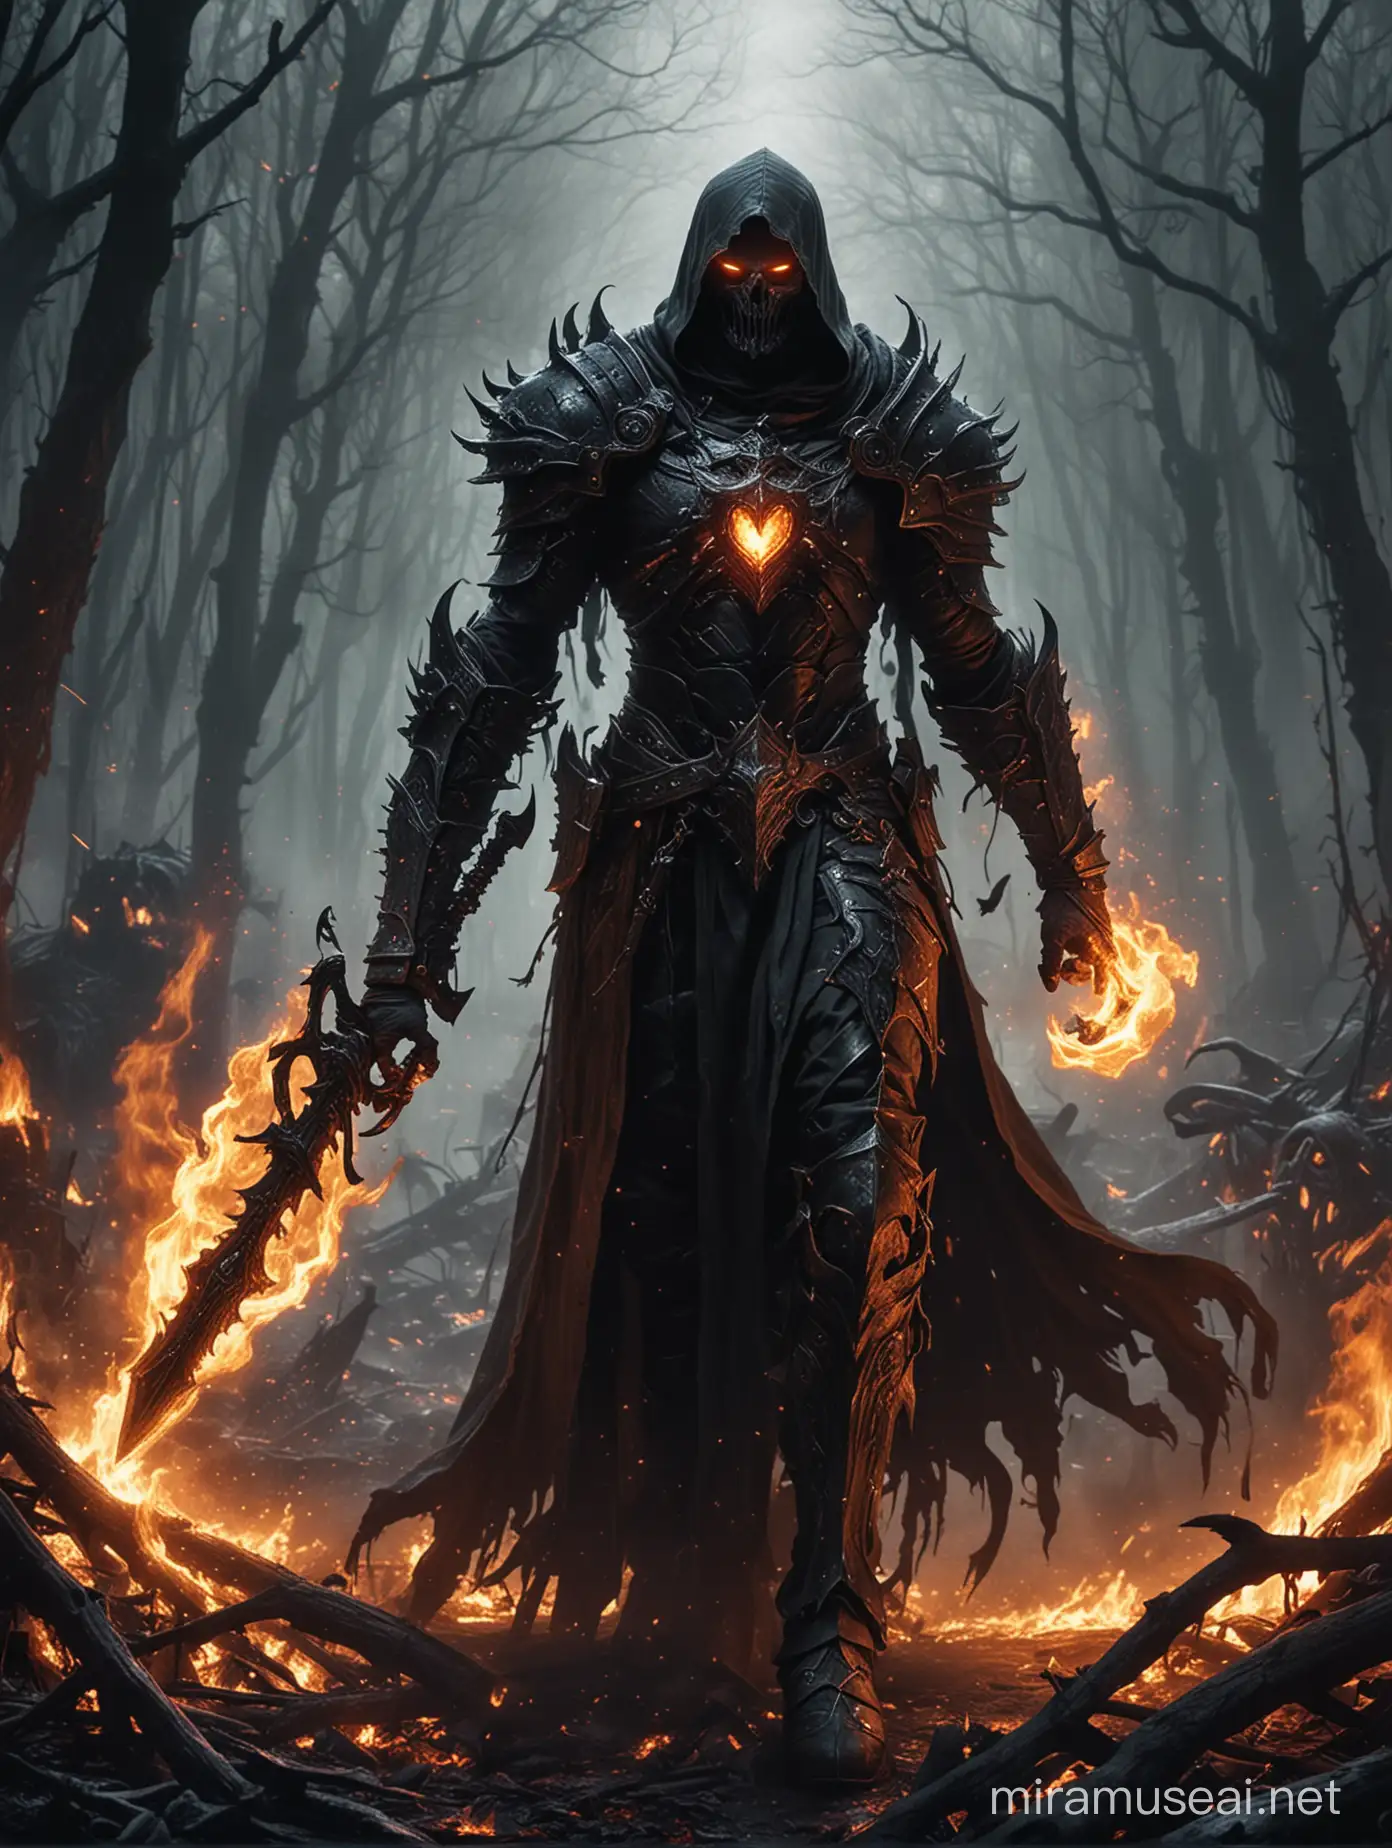 As you venture deeper into the darkness, beware the presence of the Death Knight—a spectral figure cloaked in shadow, his aura suffused with dread and malevolence. He strides through the infernal fires of hell, leaving naught but ash and cinders in his wake. Flames dance in his wake, fueled by the souls of the damned, twisted and tormented by his unholy power.

His armor, forged in the fires of damnation, radiates an eerie glow, casting twisted shadows that seem to writhe and dance with a life of their own. With each step, the ground trembles, and the air grows thick with the stench of death and decay.

Those who dare to gaze upon him feel an icy chill grip their hearts, as if death itself were reaching out to claim their souls. His eyes burn with an otherworldly flame, piercing through the darkness with a gaze that freezes the blood in your veins.

Beware, traveler, for the Death Knight is a harbinger of doom, a relentless hunter who knows no mercy. His presence alone is enough to inspire terror in the bravest of souls, for he is a force of darkness that few can hope to withstand.